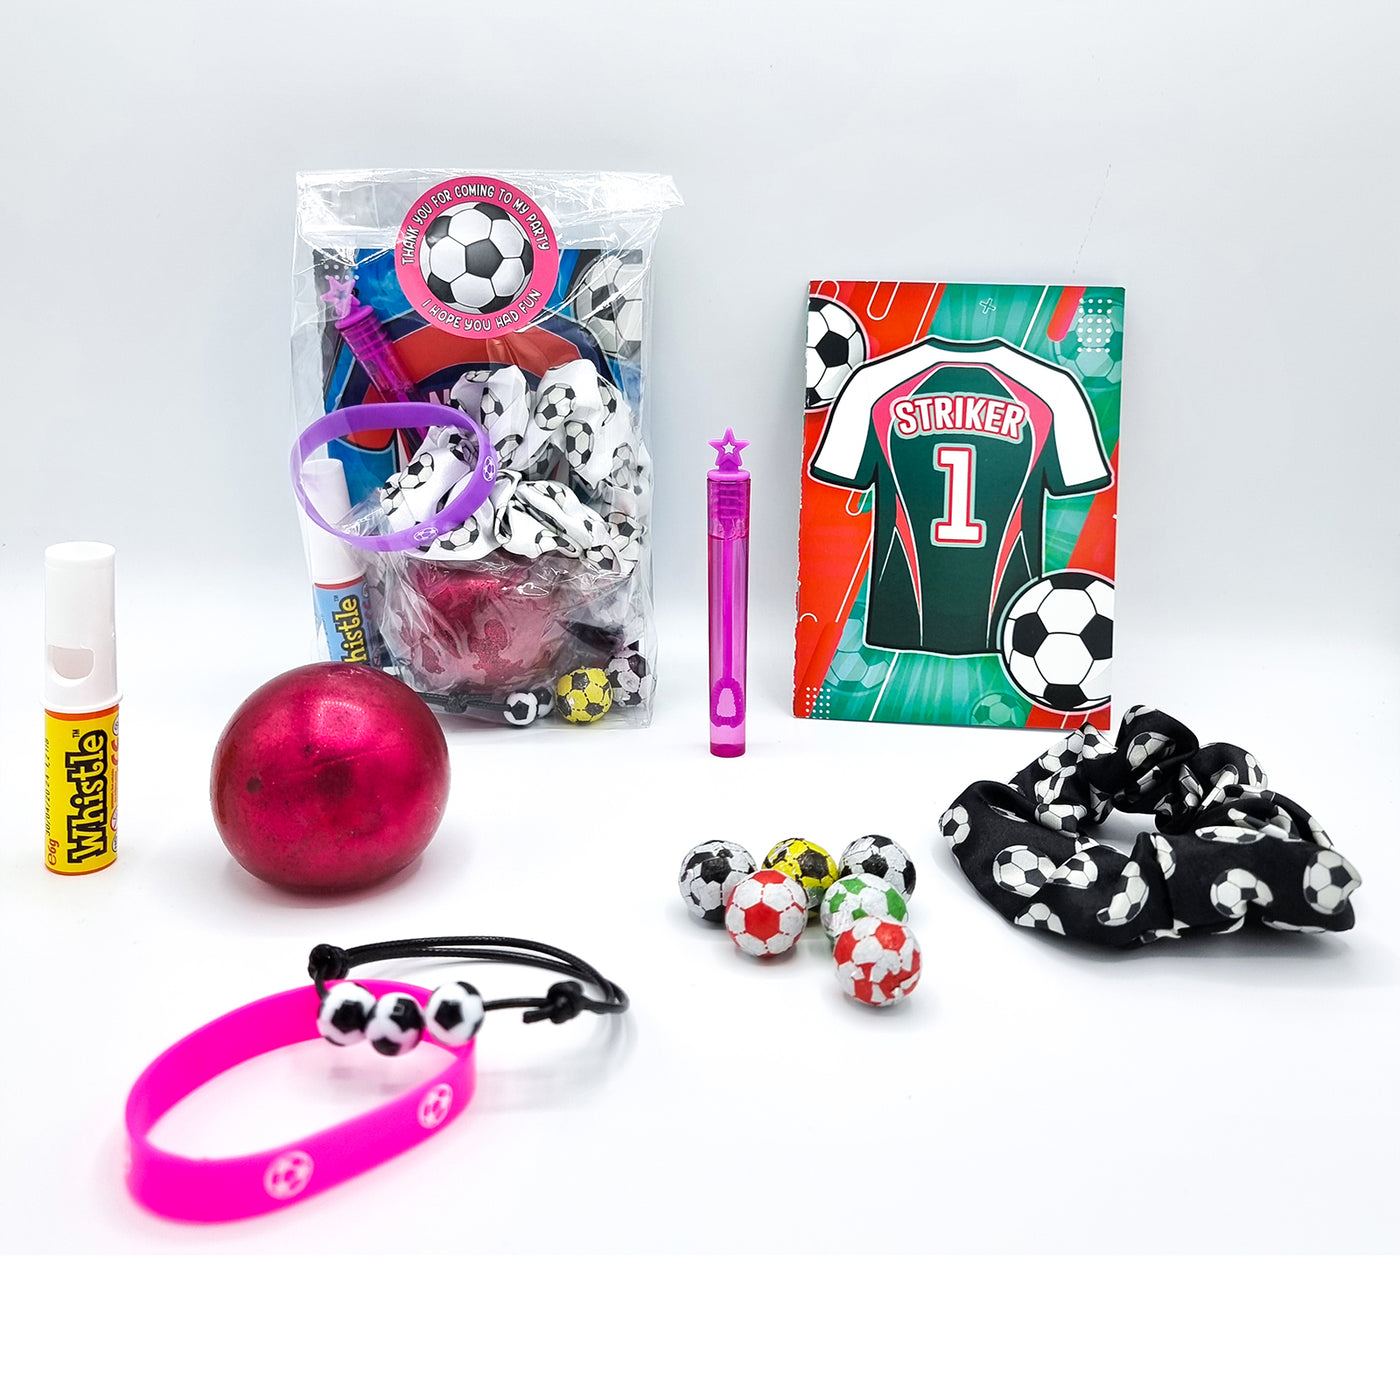 Boys Girls Pre Filled Football Party Favours With Toys And Sweets, Football Party Favours.